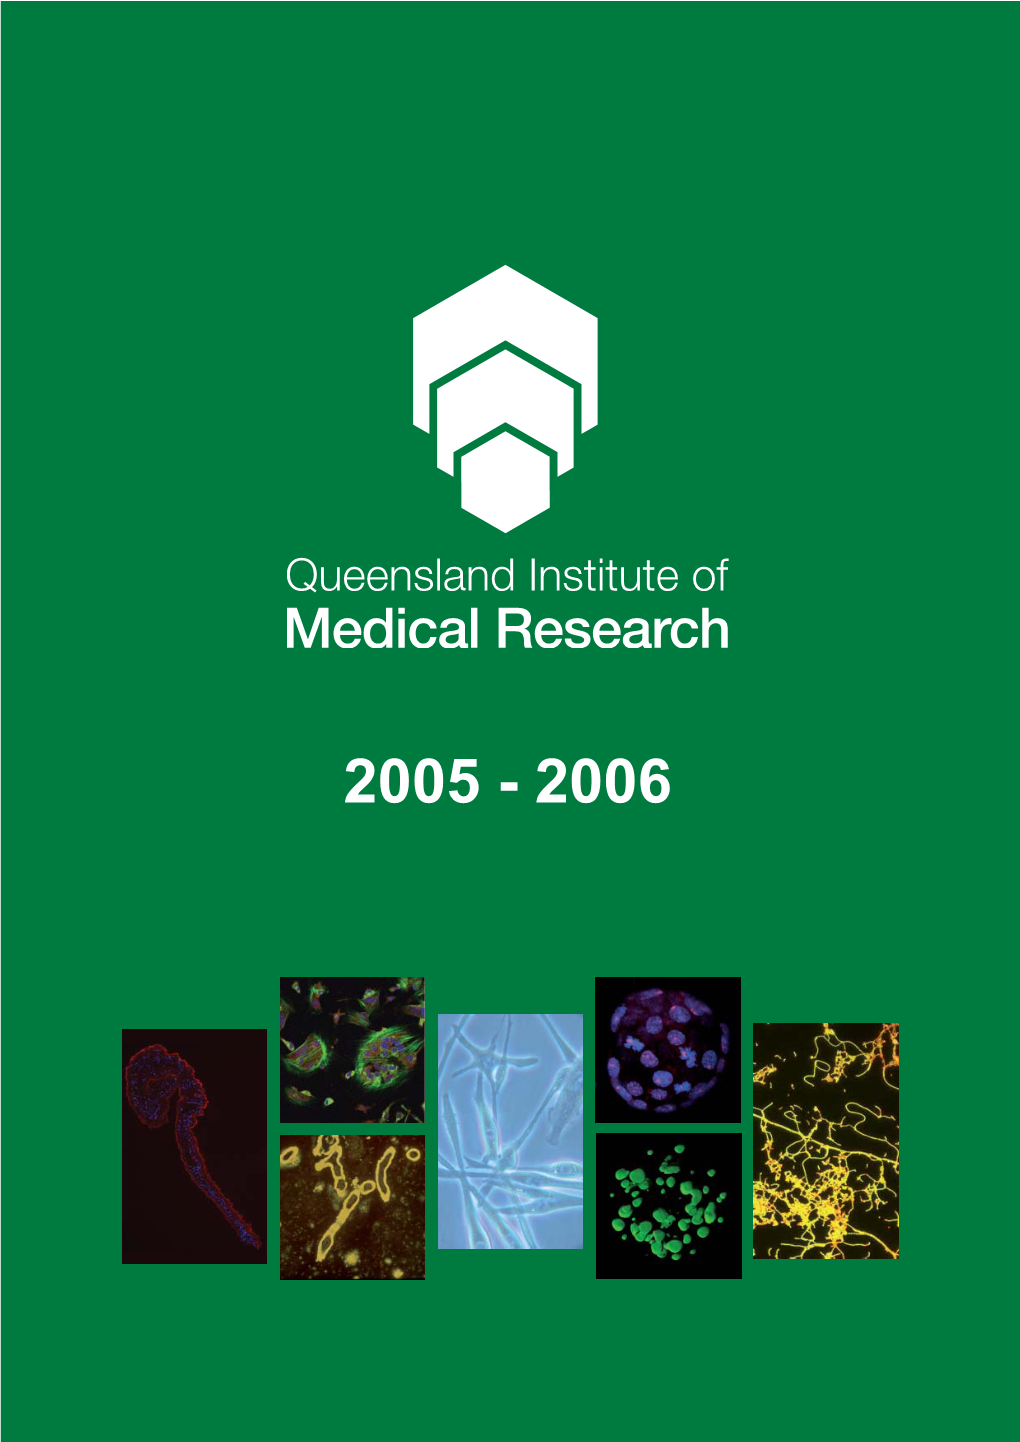 QIMR Annual Report 2005-2006 Final Version.Indd